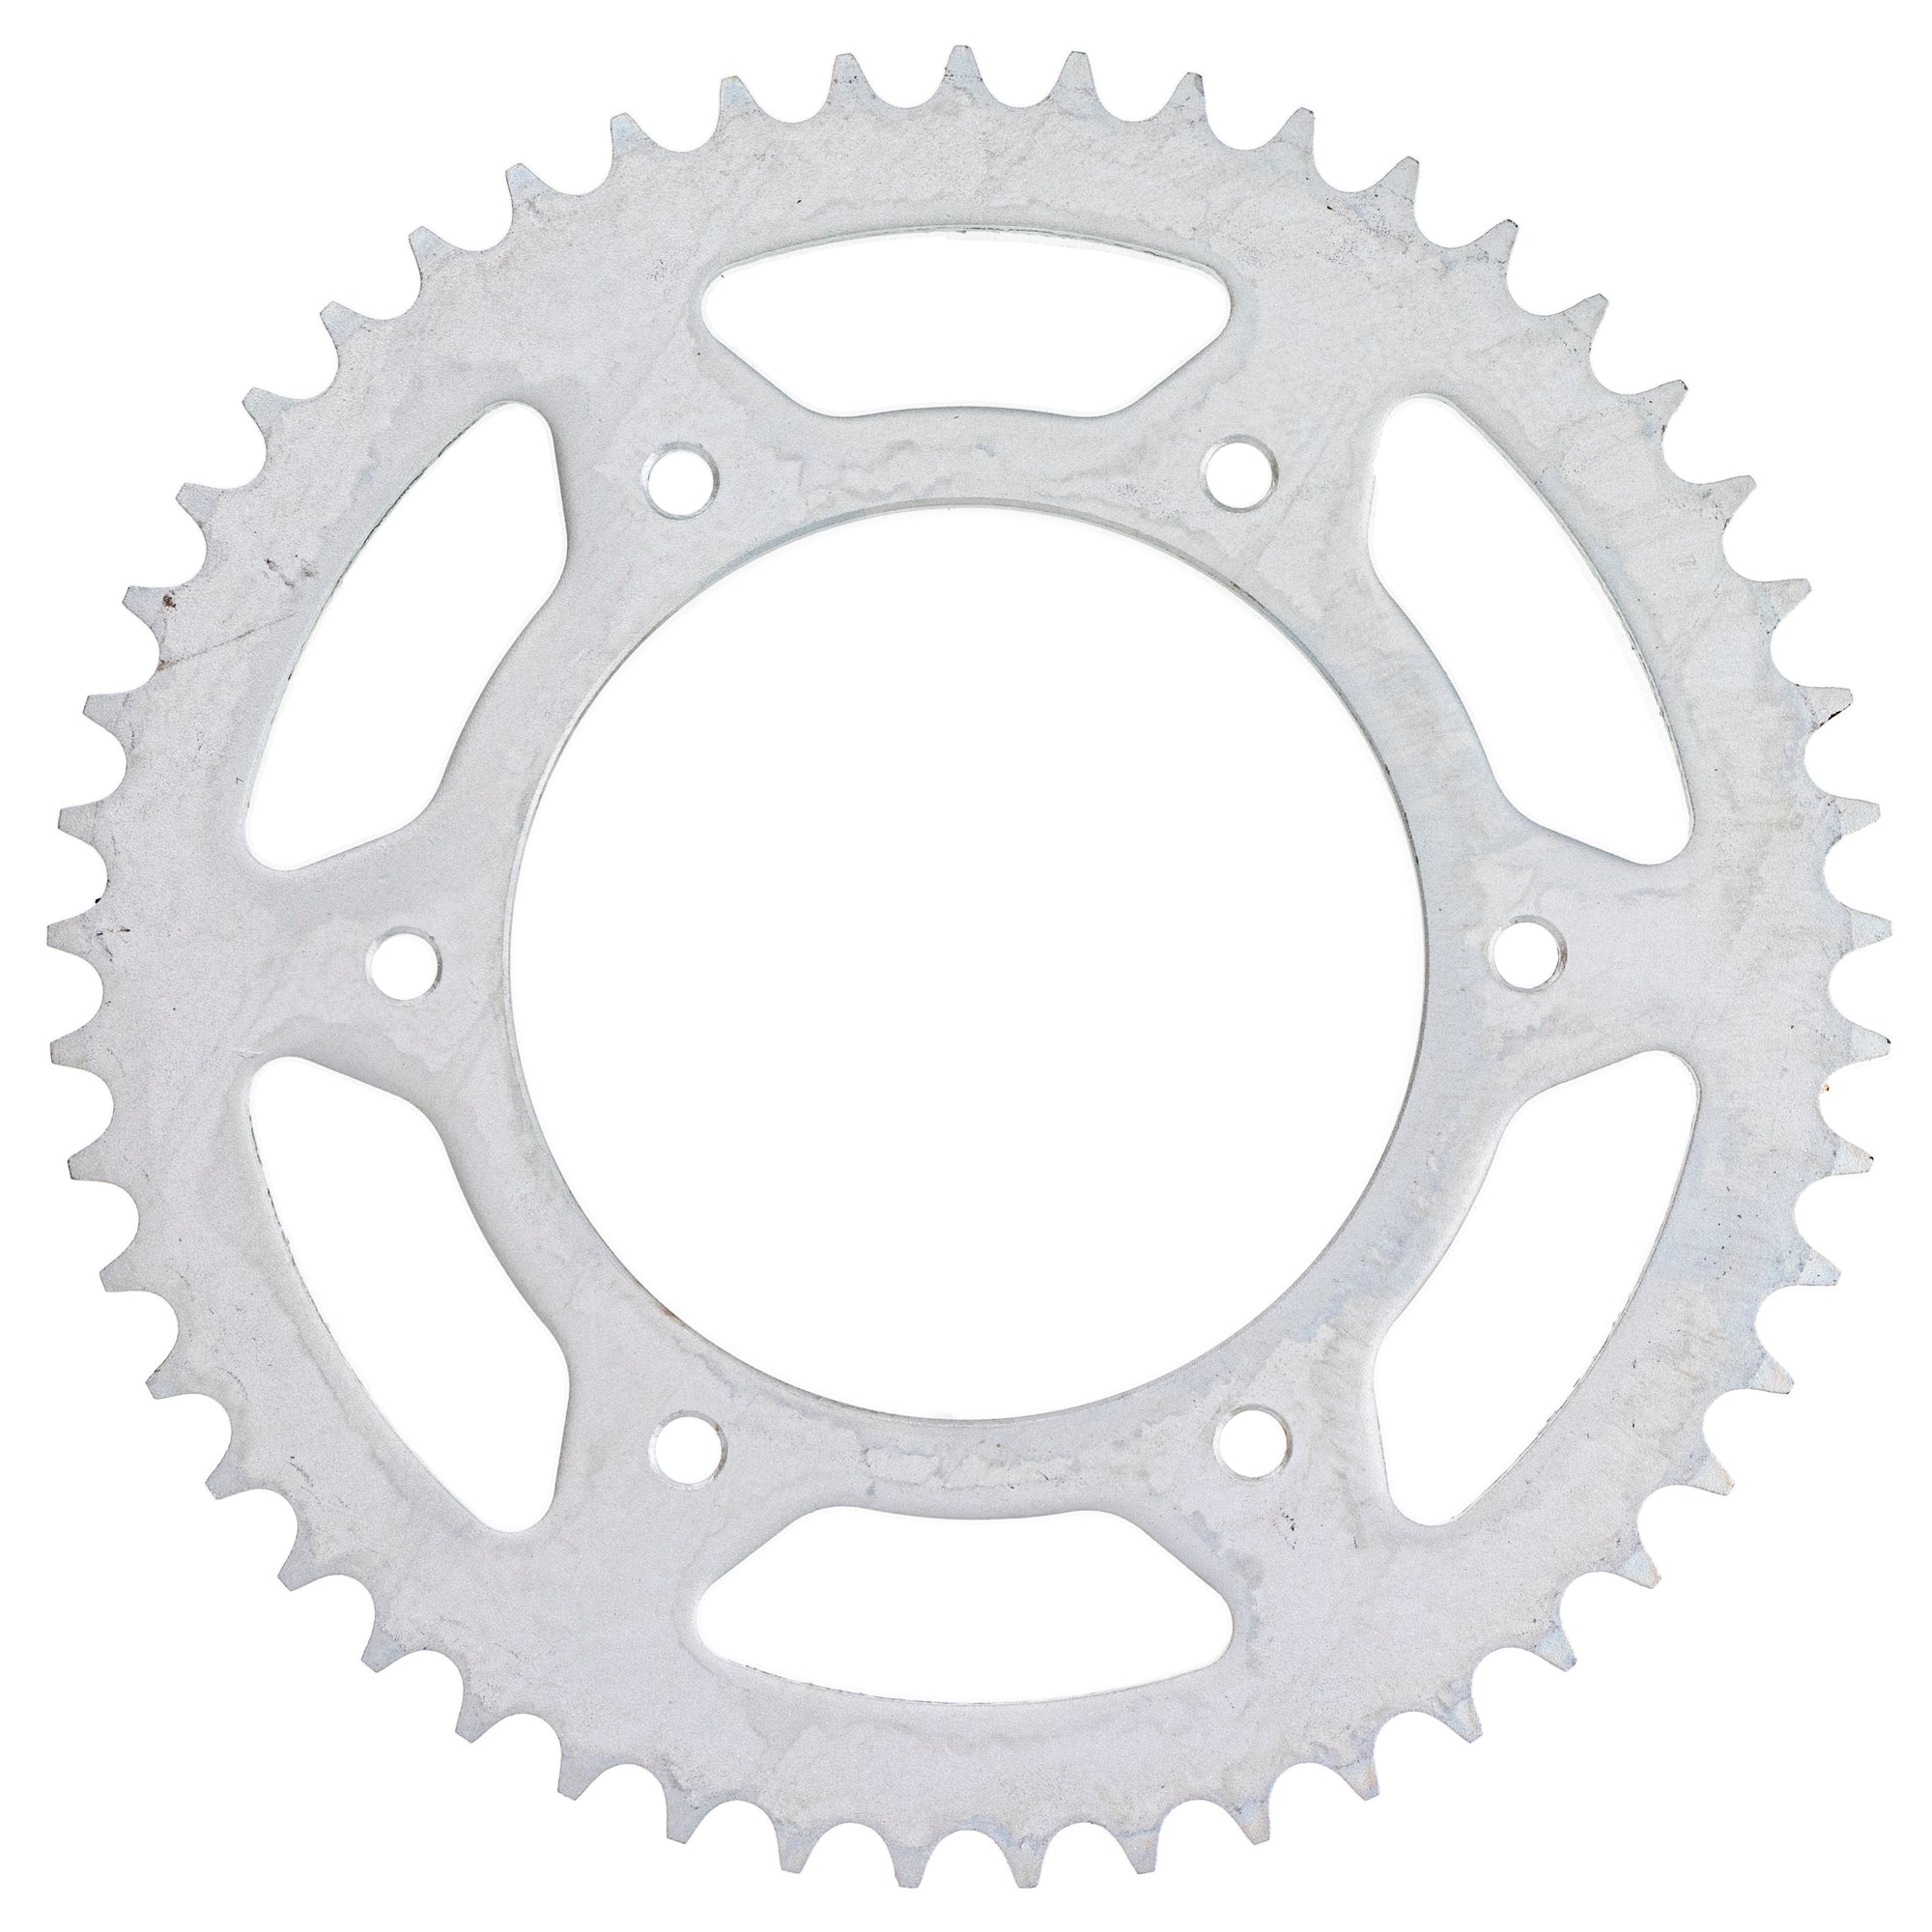 520 Pitch Front 13T Rear 49T Drive Sprocket Kit for Beta RR 250 300